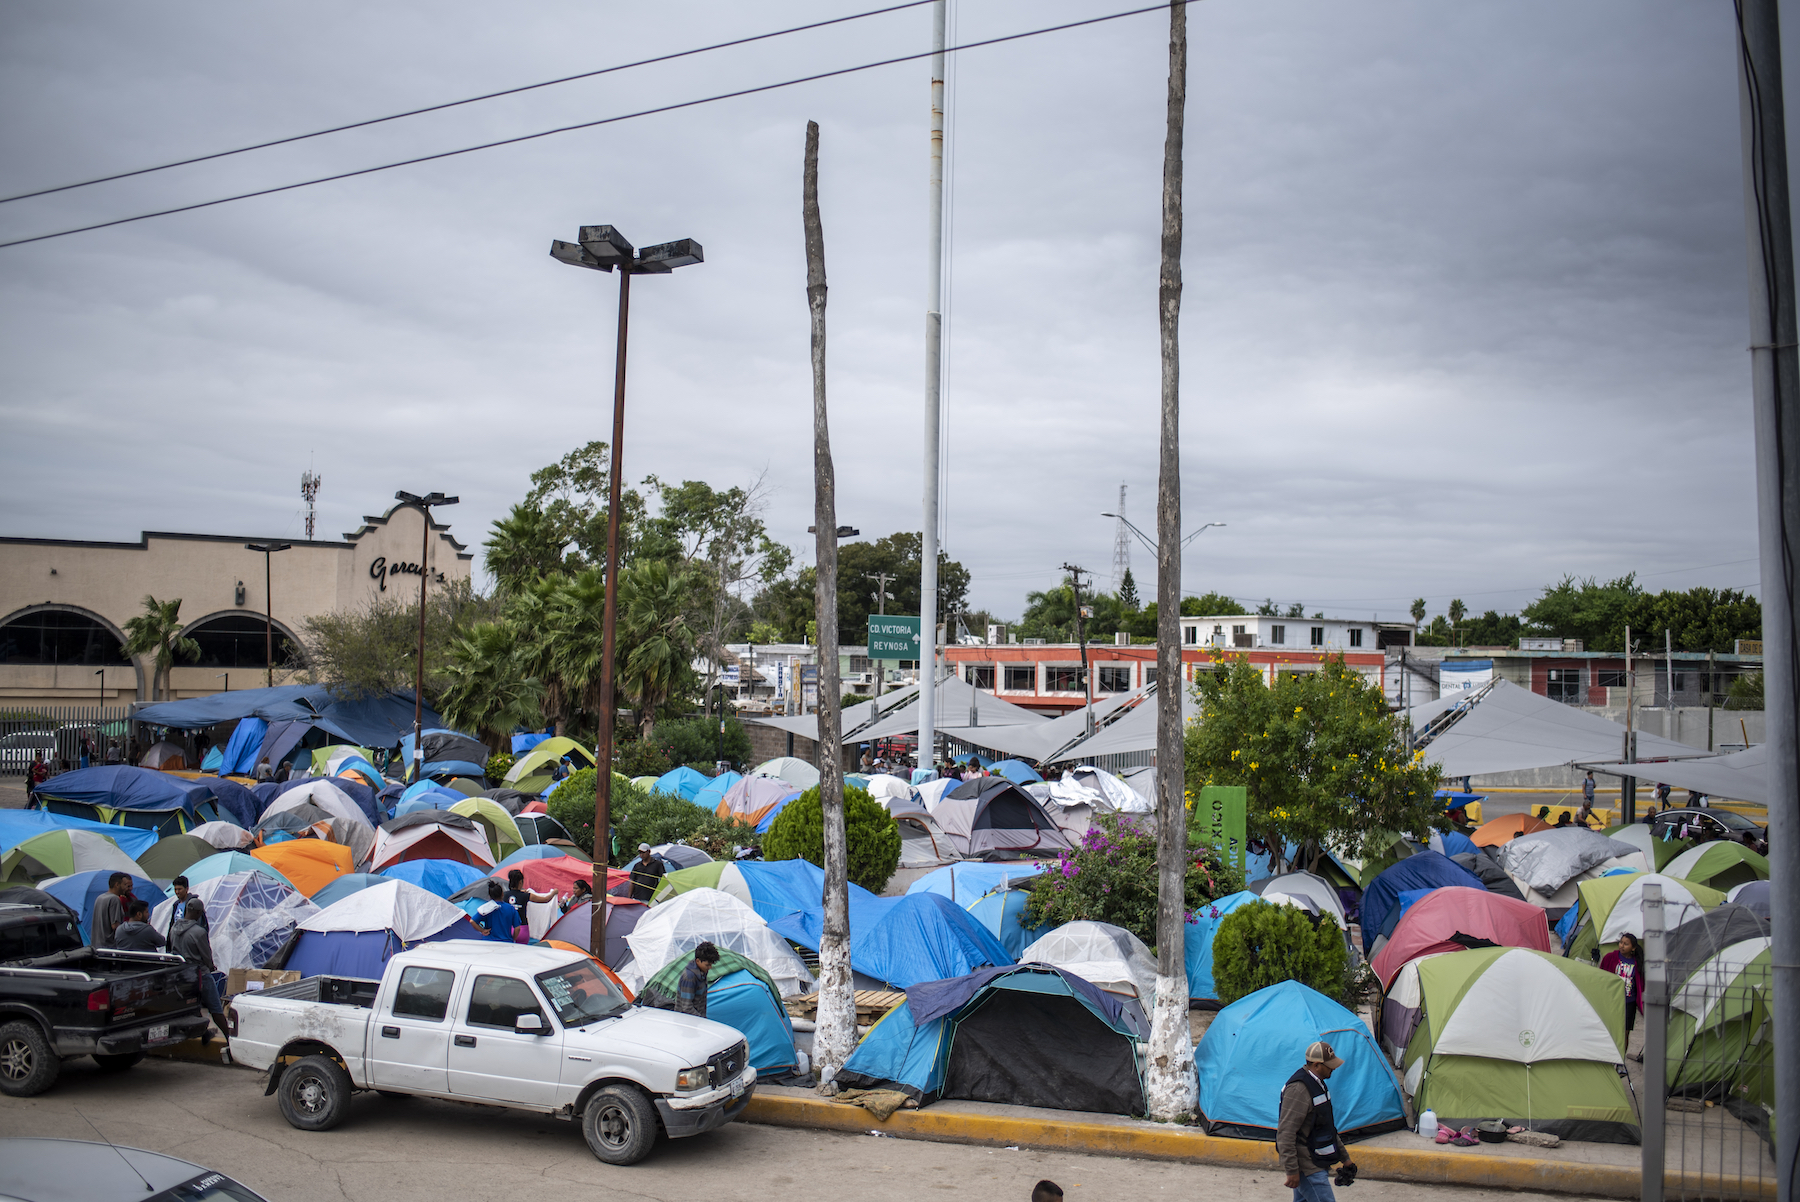 Hundreds of people are living in tents along the border. Photo by Sergio Flores.